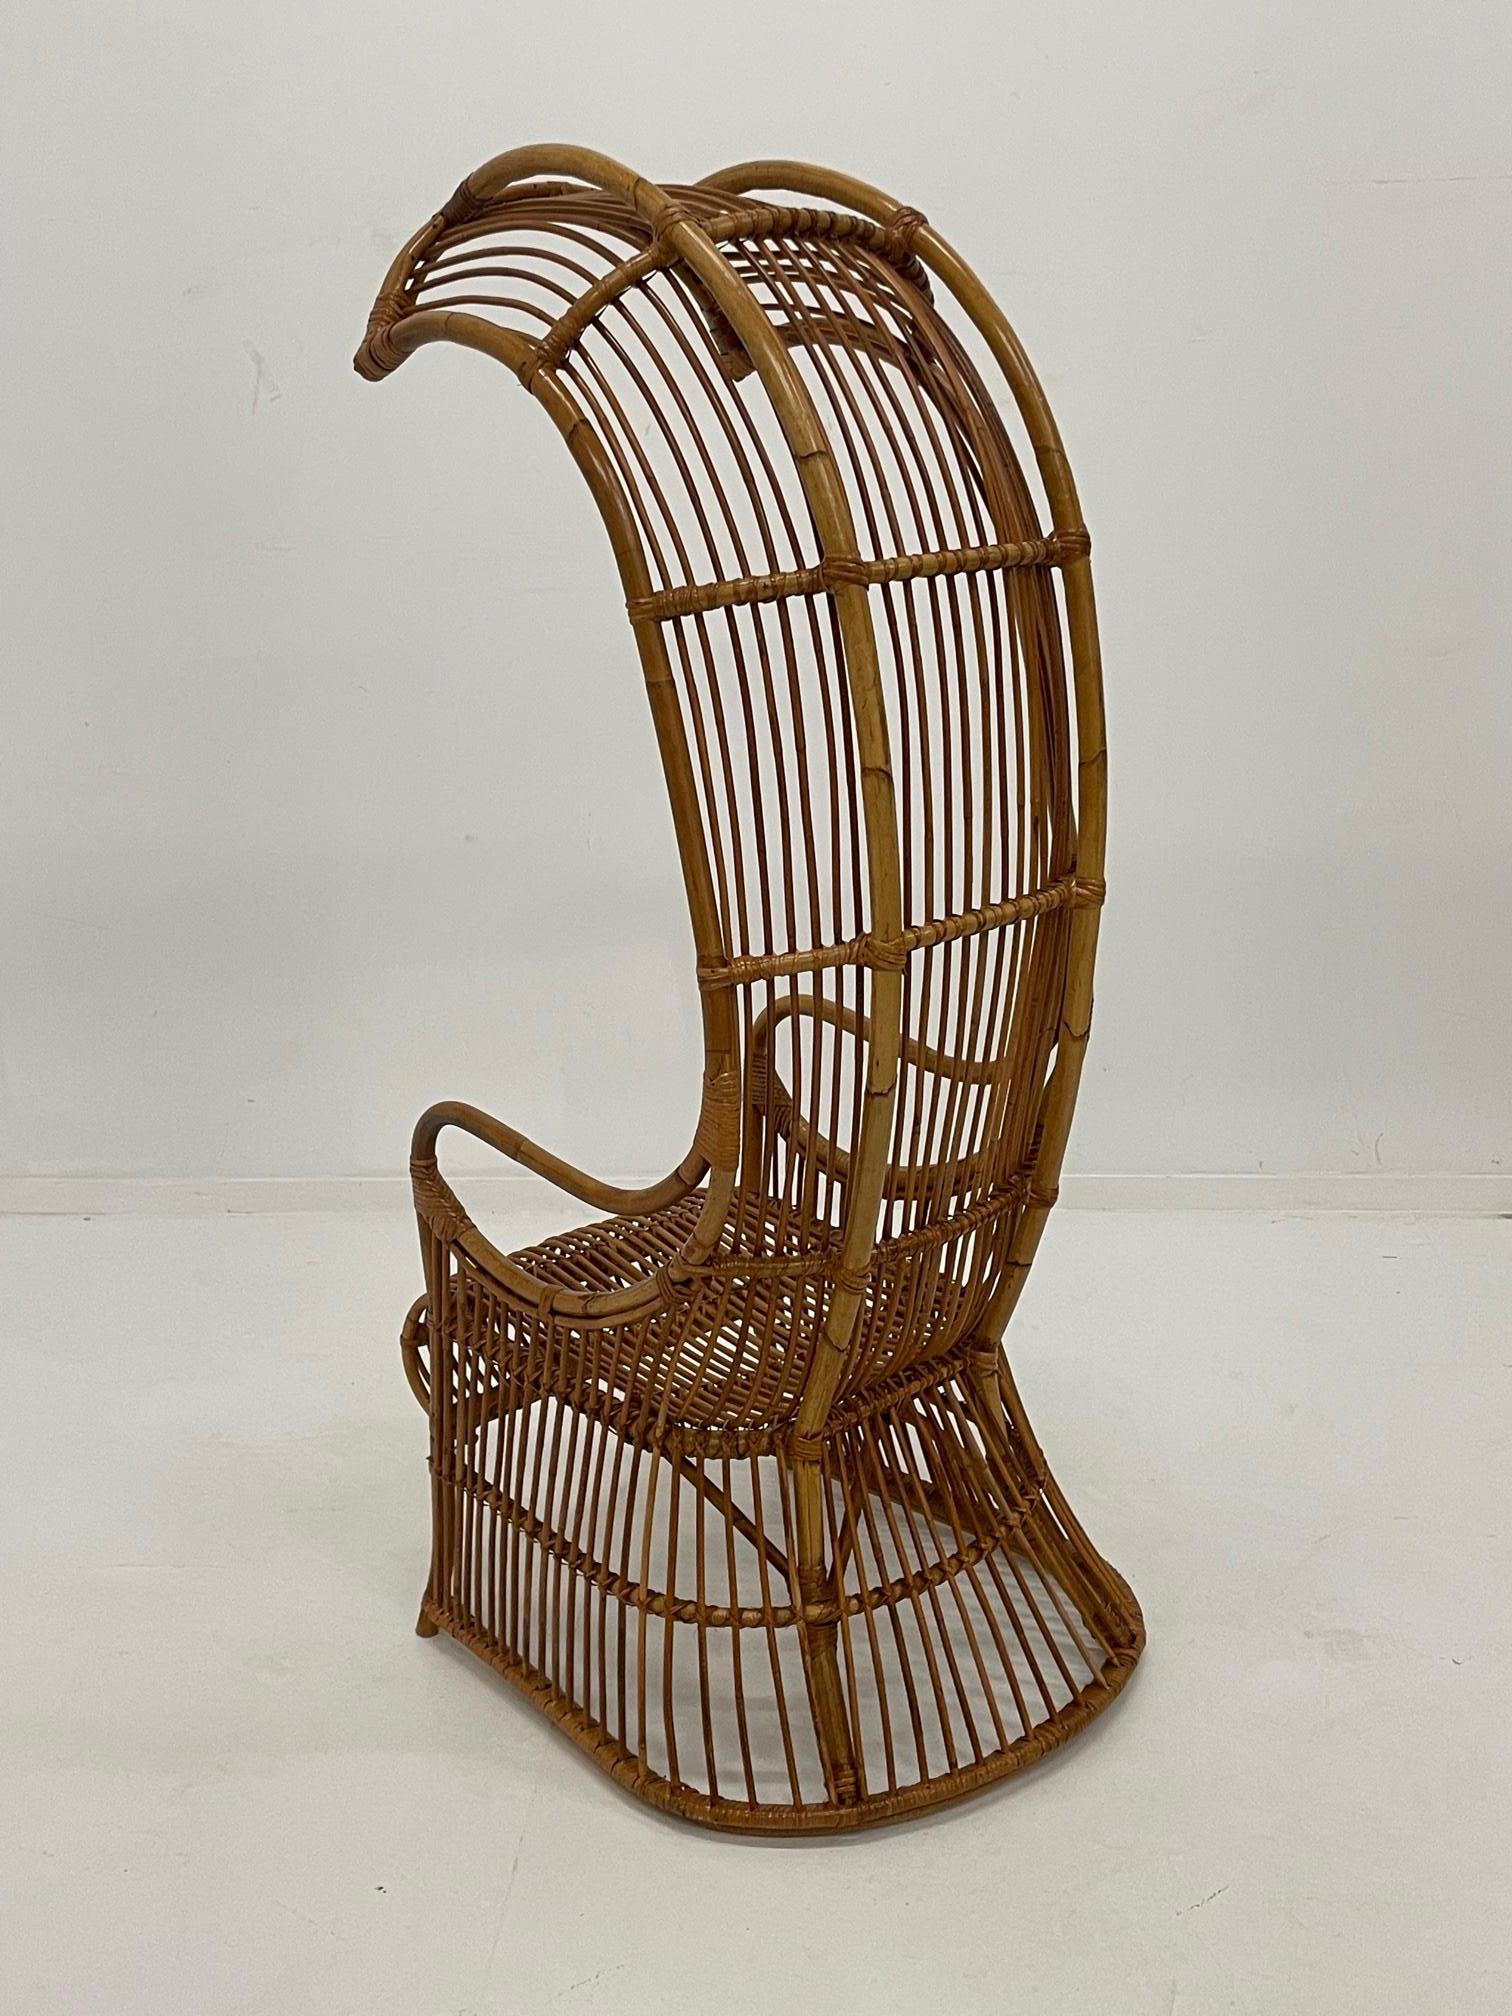 Incredible Rare Vintage Rattan Porters Chair with Sculptural Silhouette For Sale 2